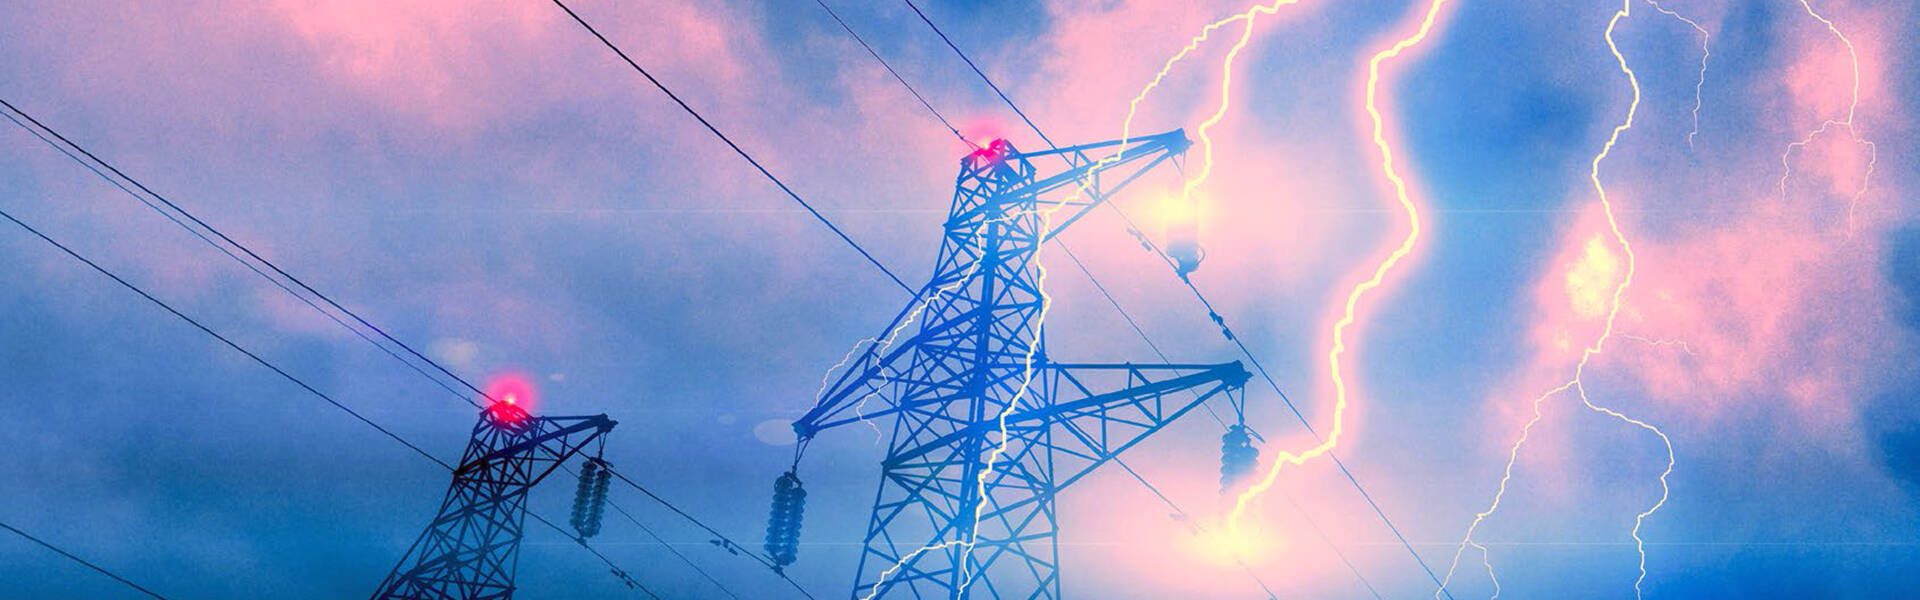 The eye of the storm: How technology can supercharge utilities’ responses to extreme weather